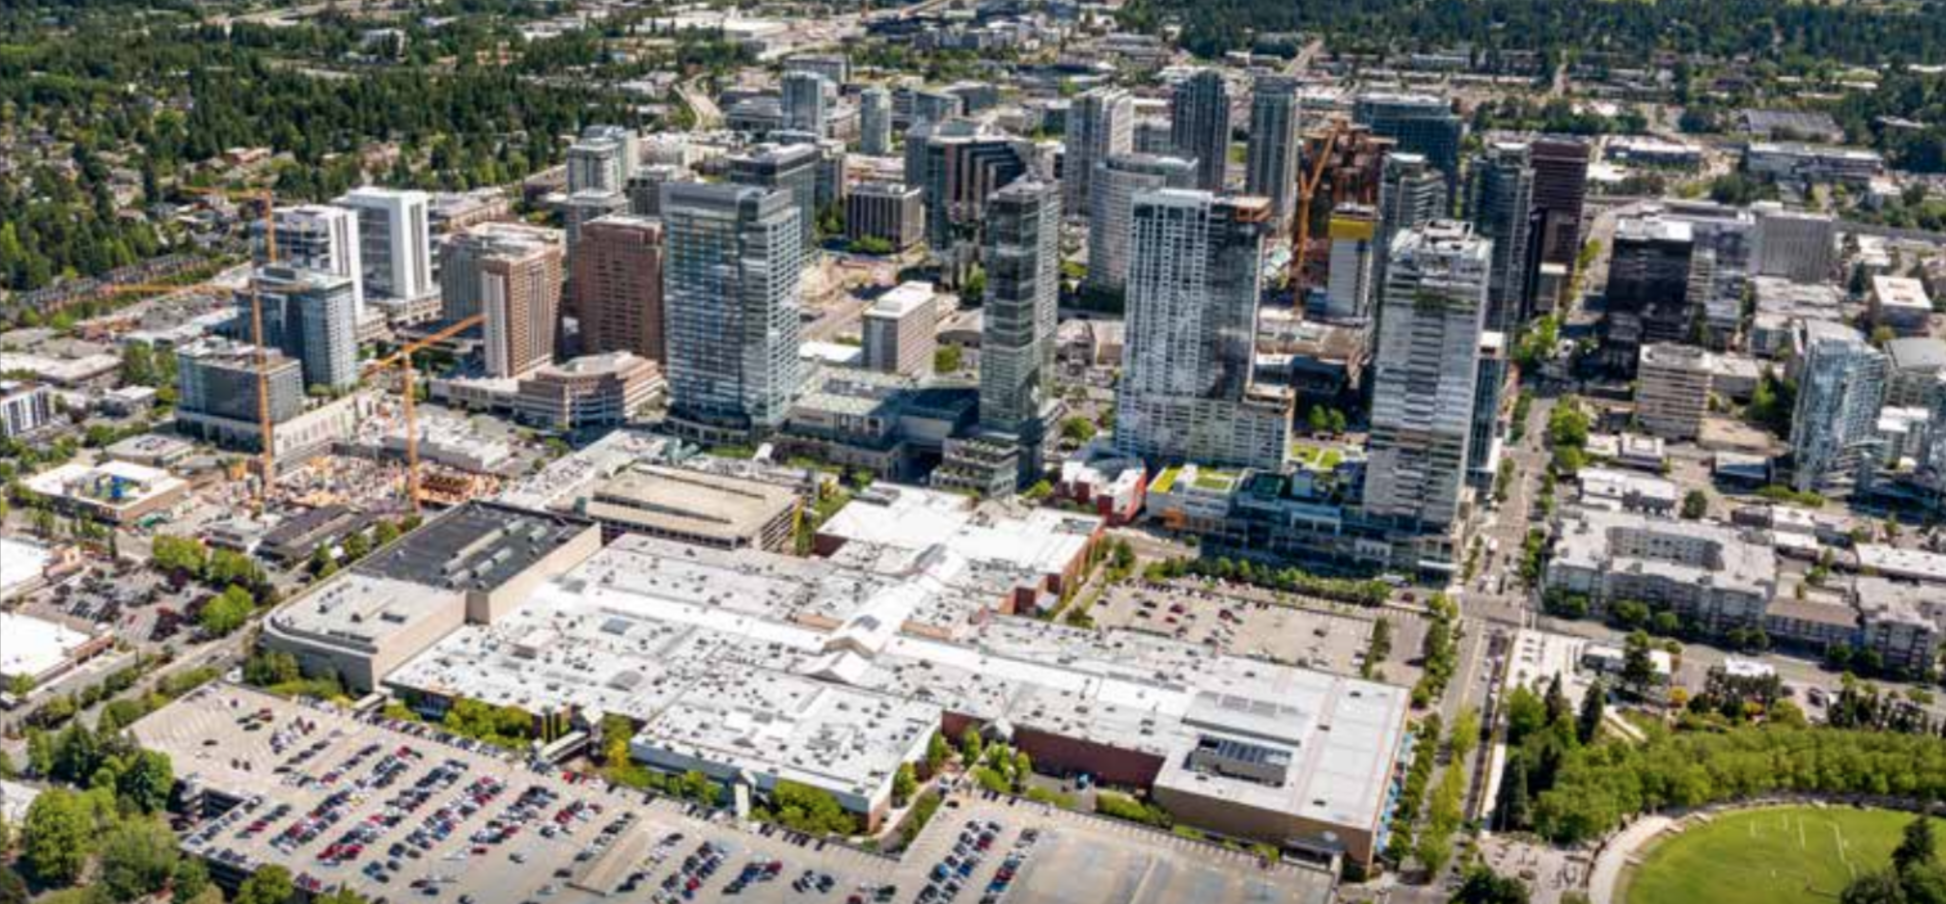 The Bellevue Collection today with 5.5 million square foot campus in Bellevue